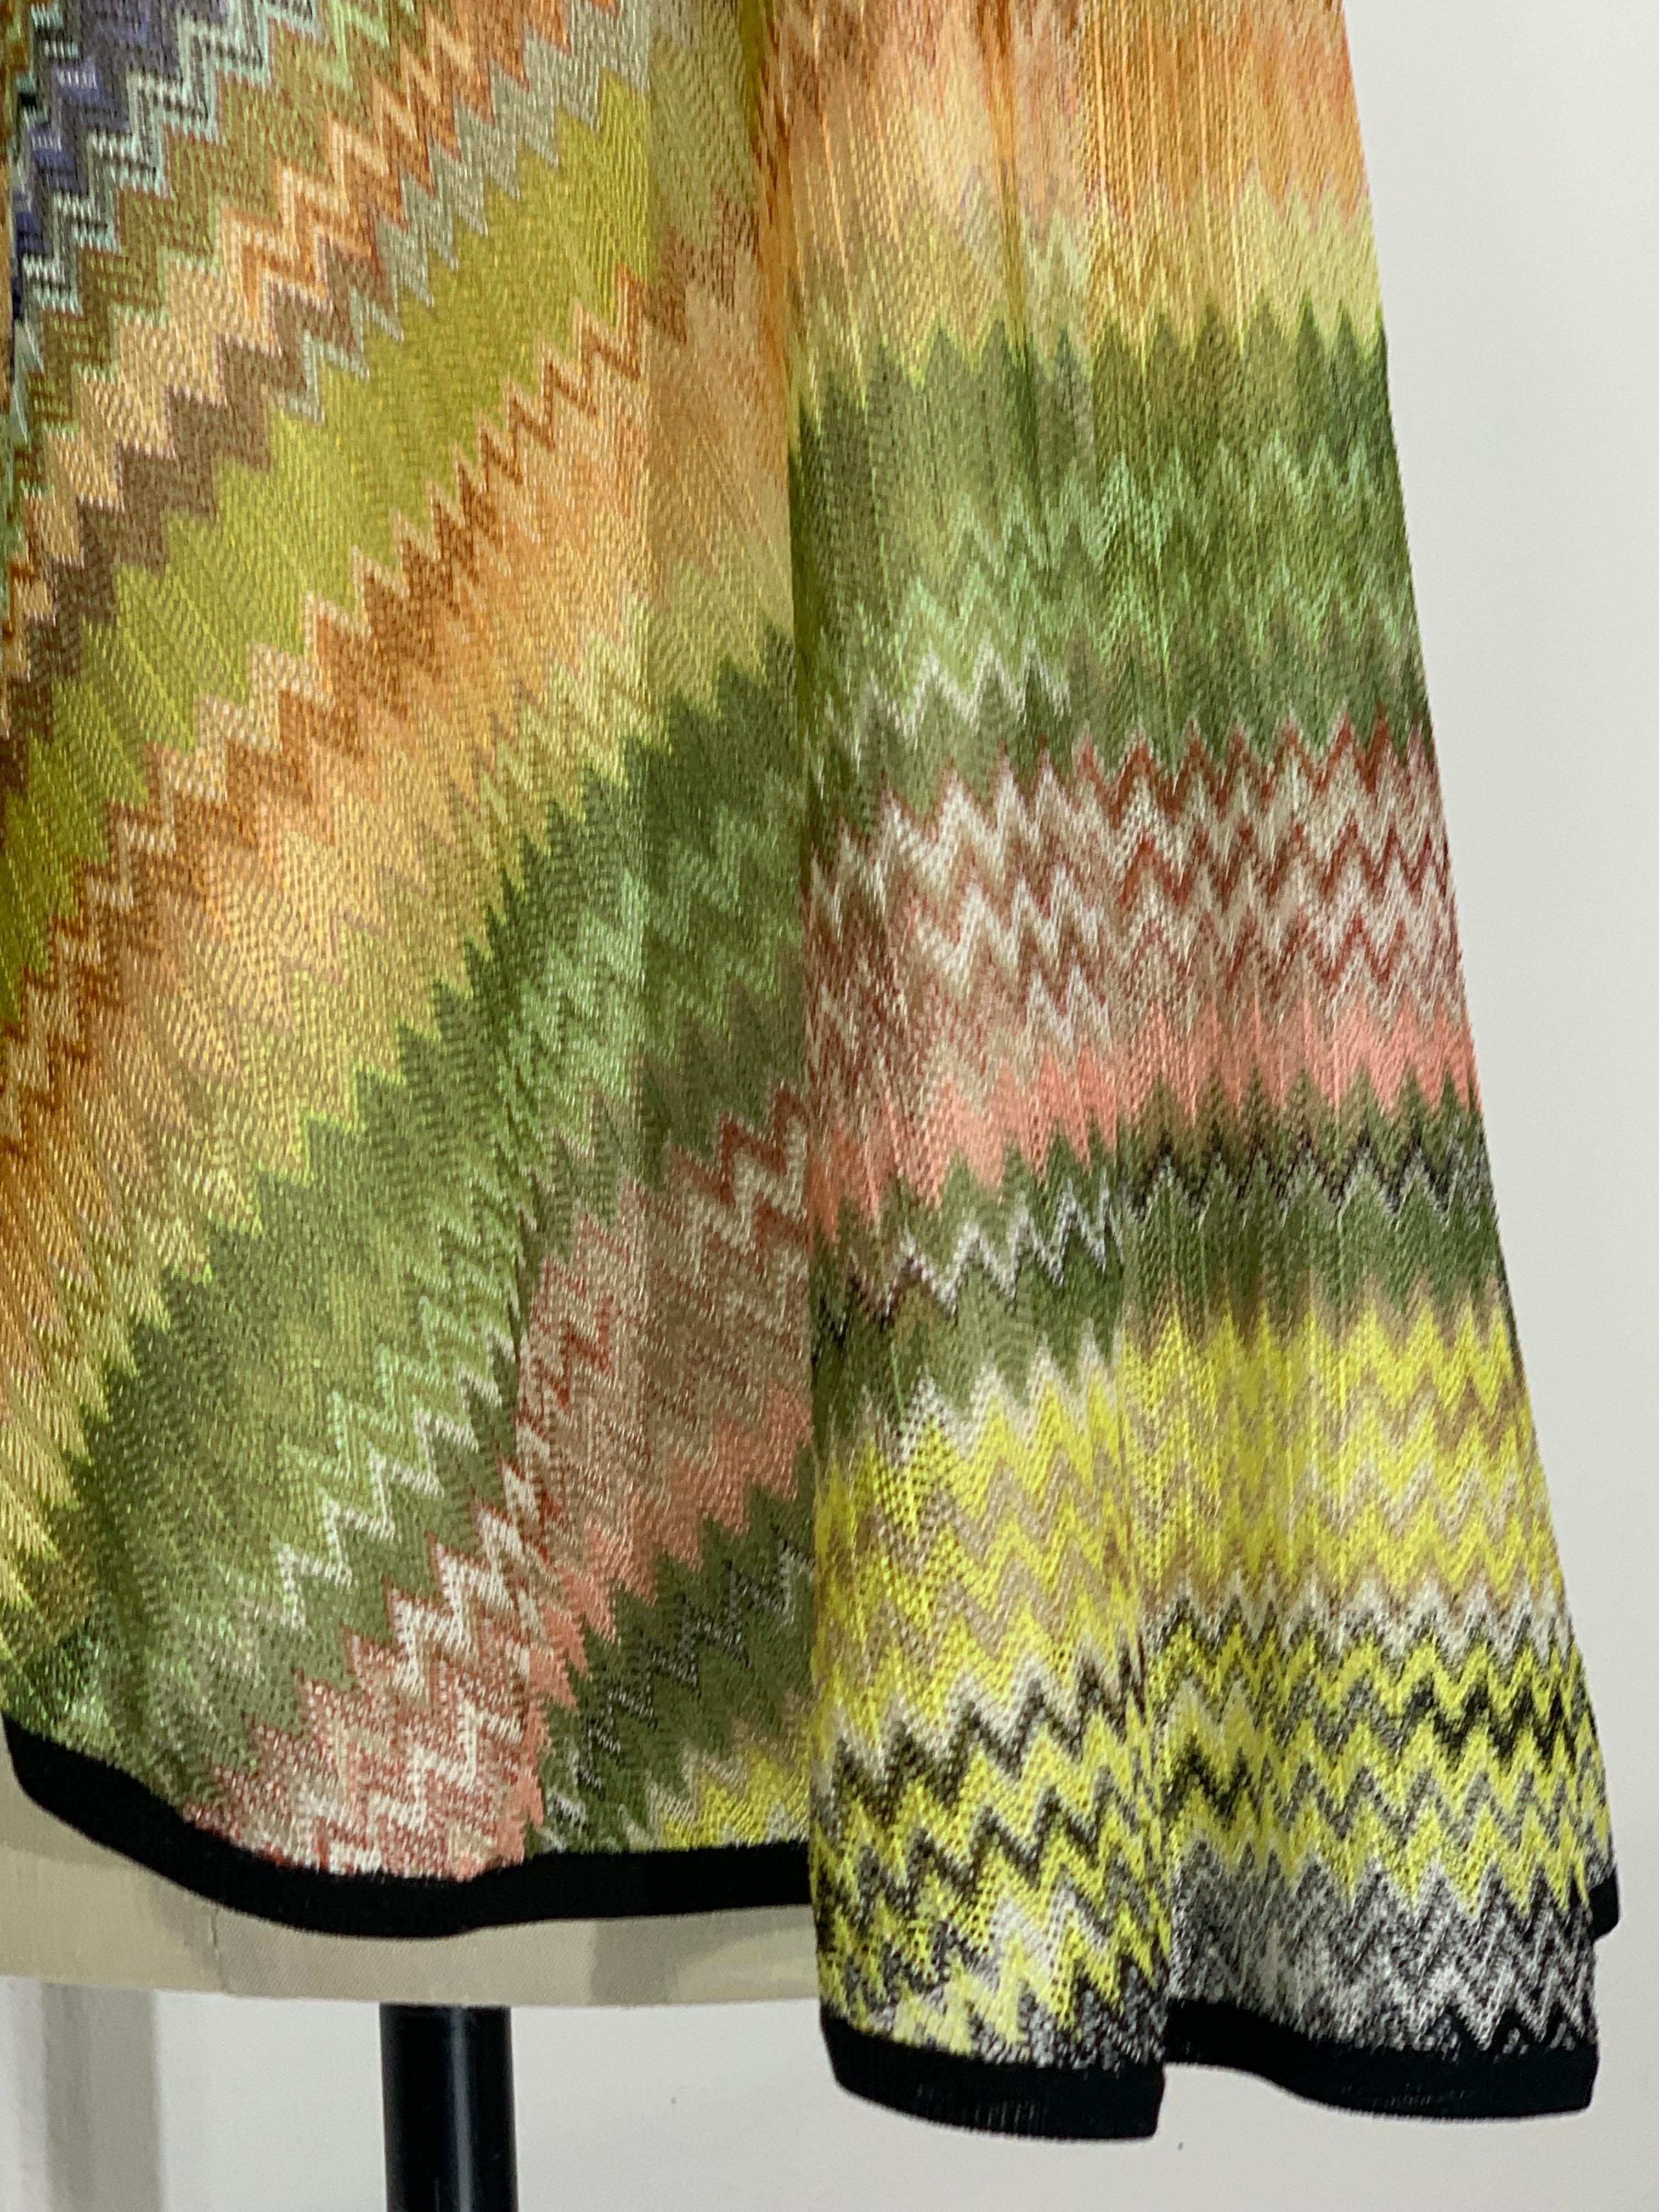 Missoni Spring/Summer Rayon & Cotton Knit Cover-Up in Classic Missoni Zig-Zag For Sale 5